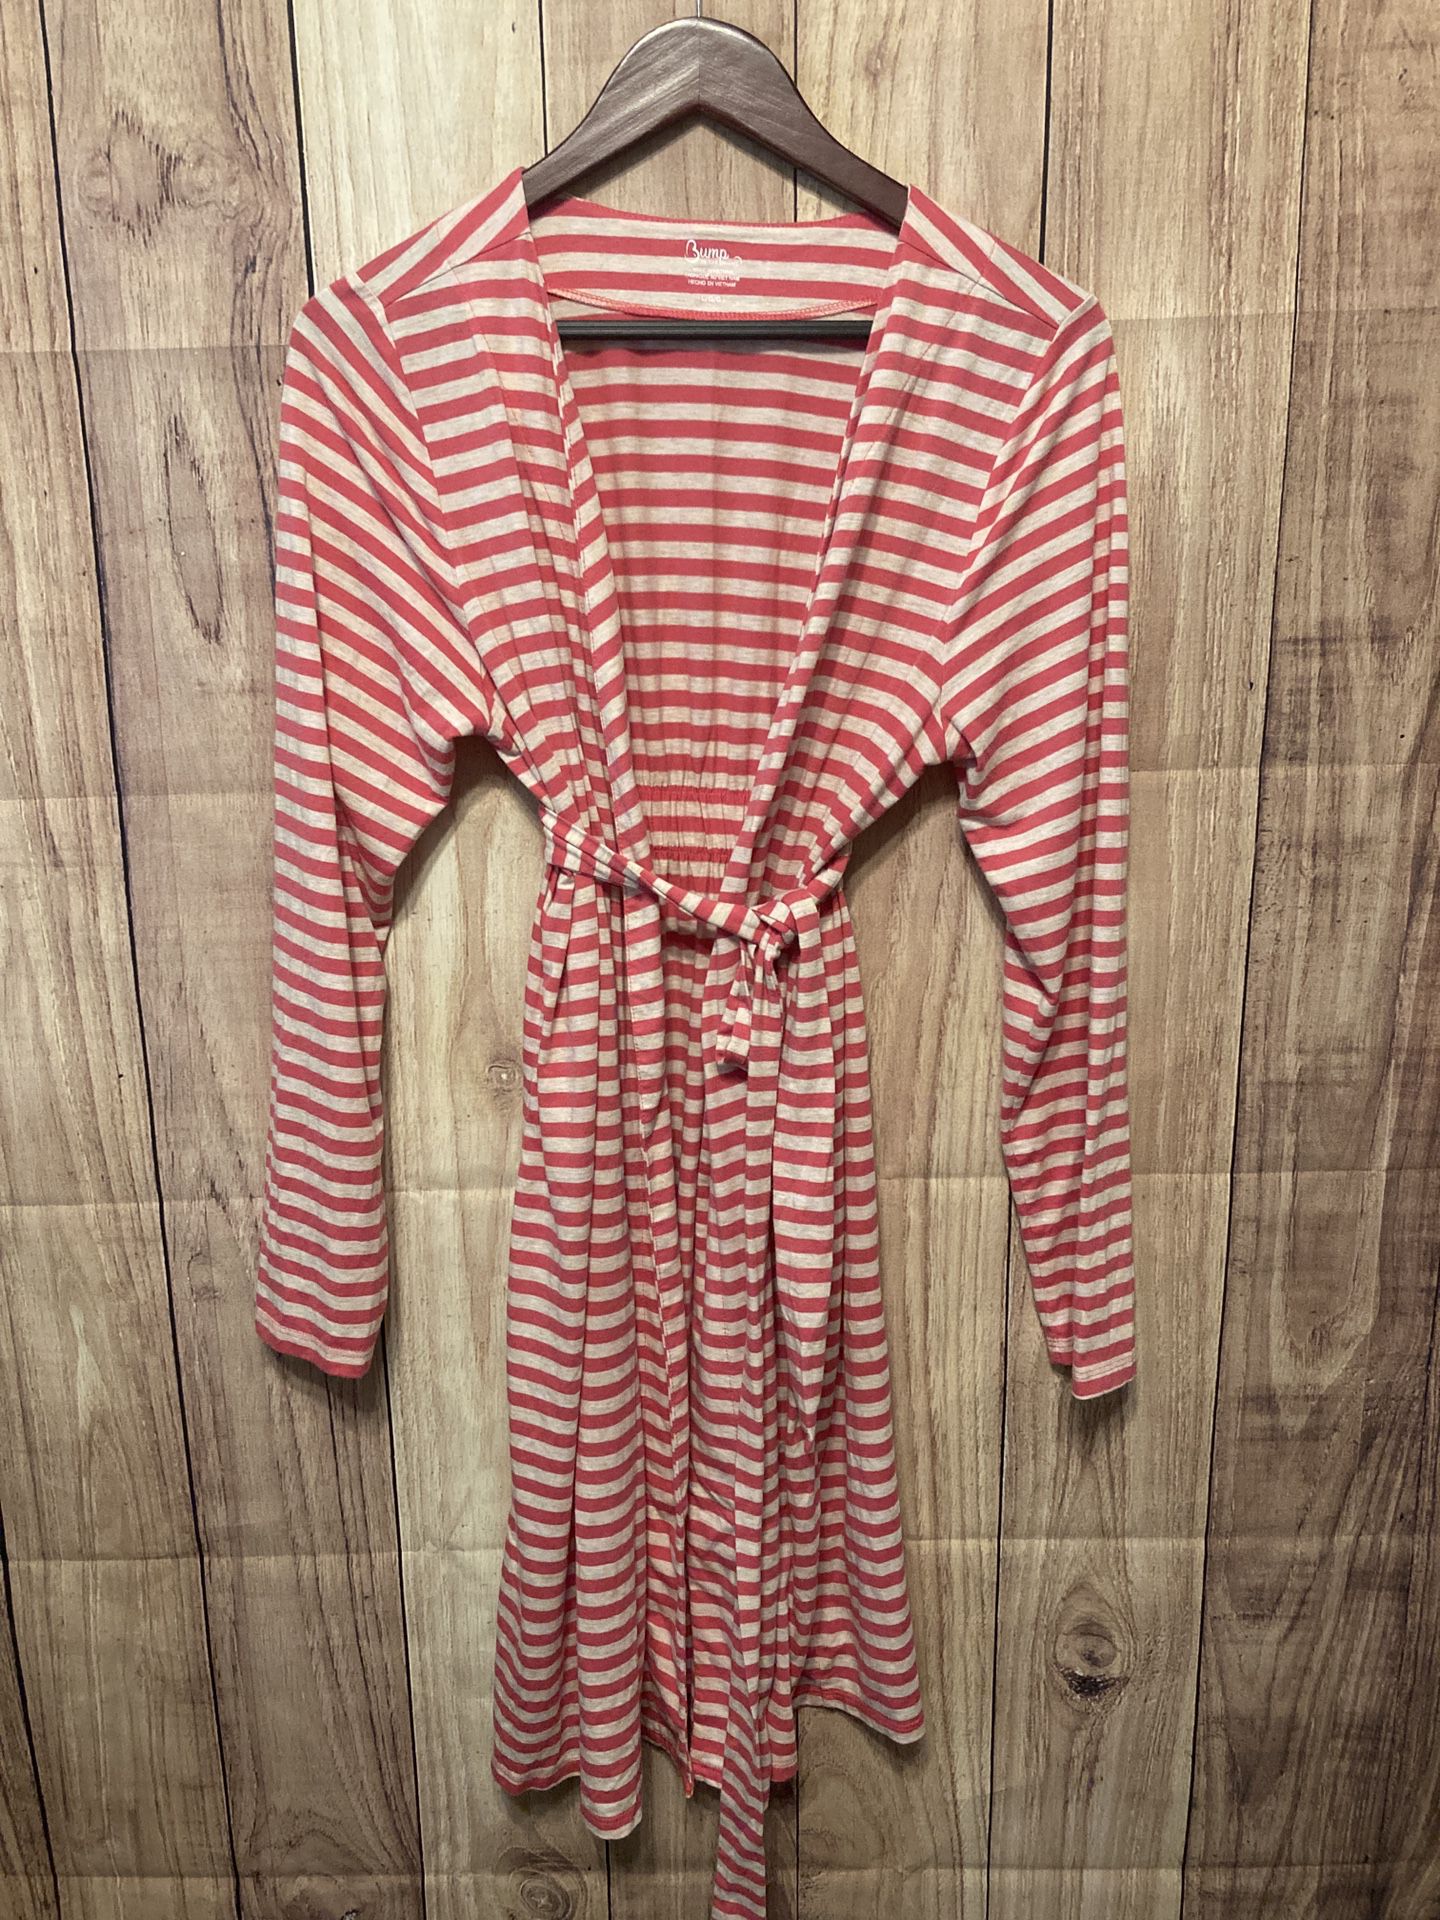 Bump in the night Large maternity/nursing robe nightgown red white striped